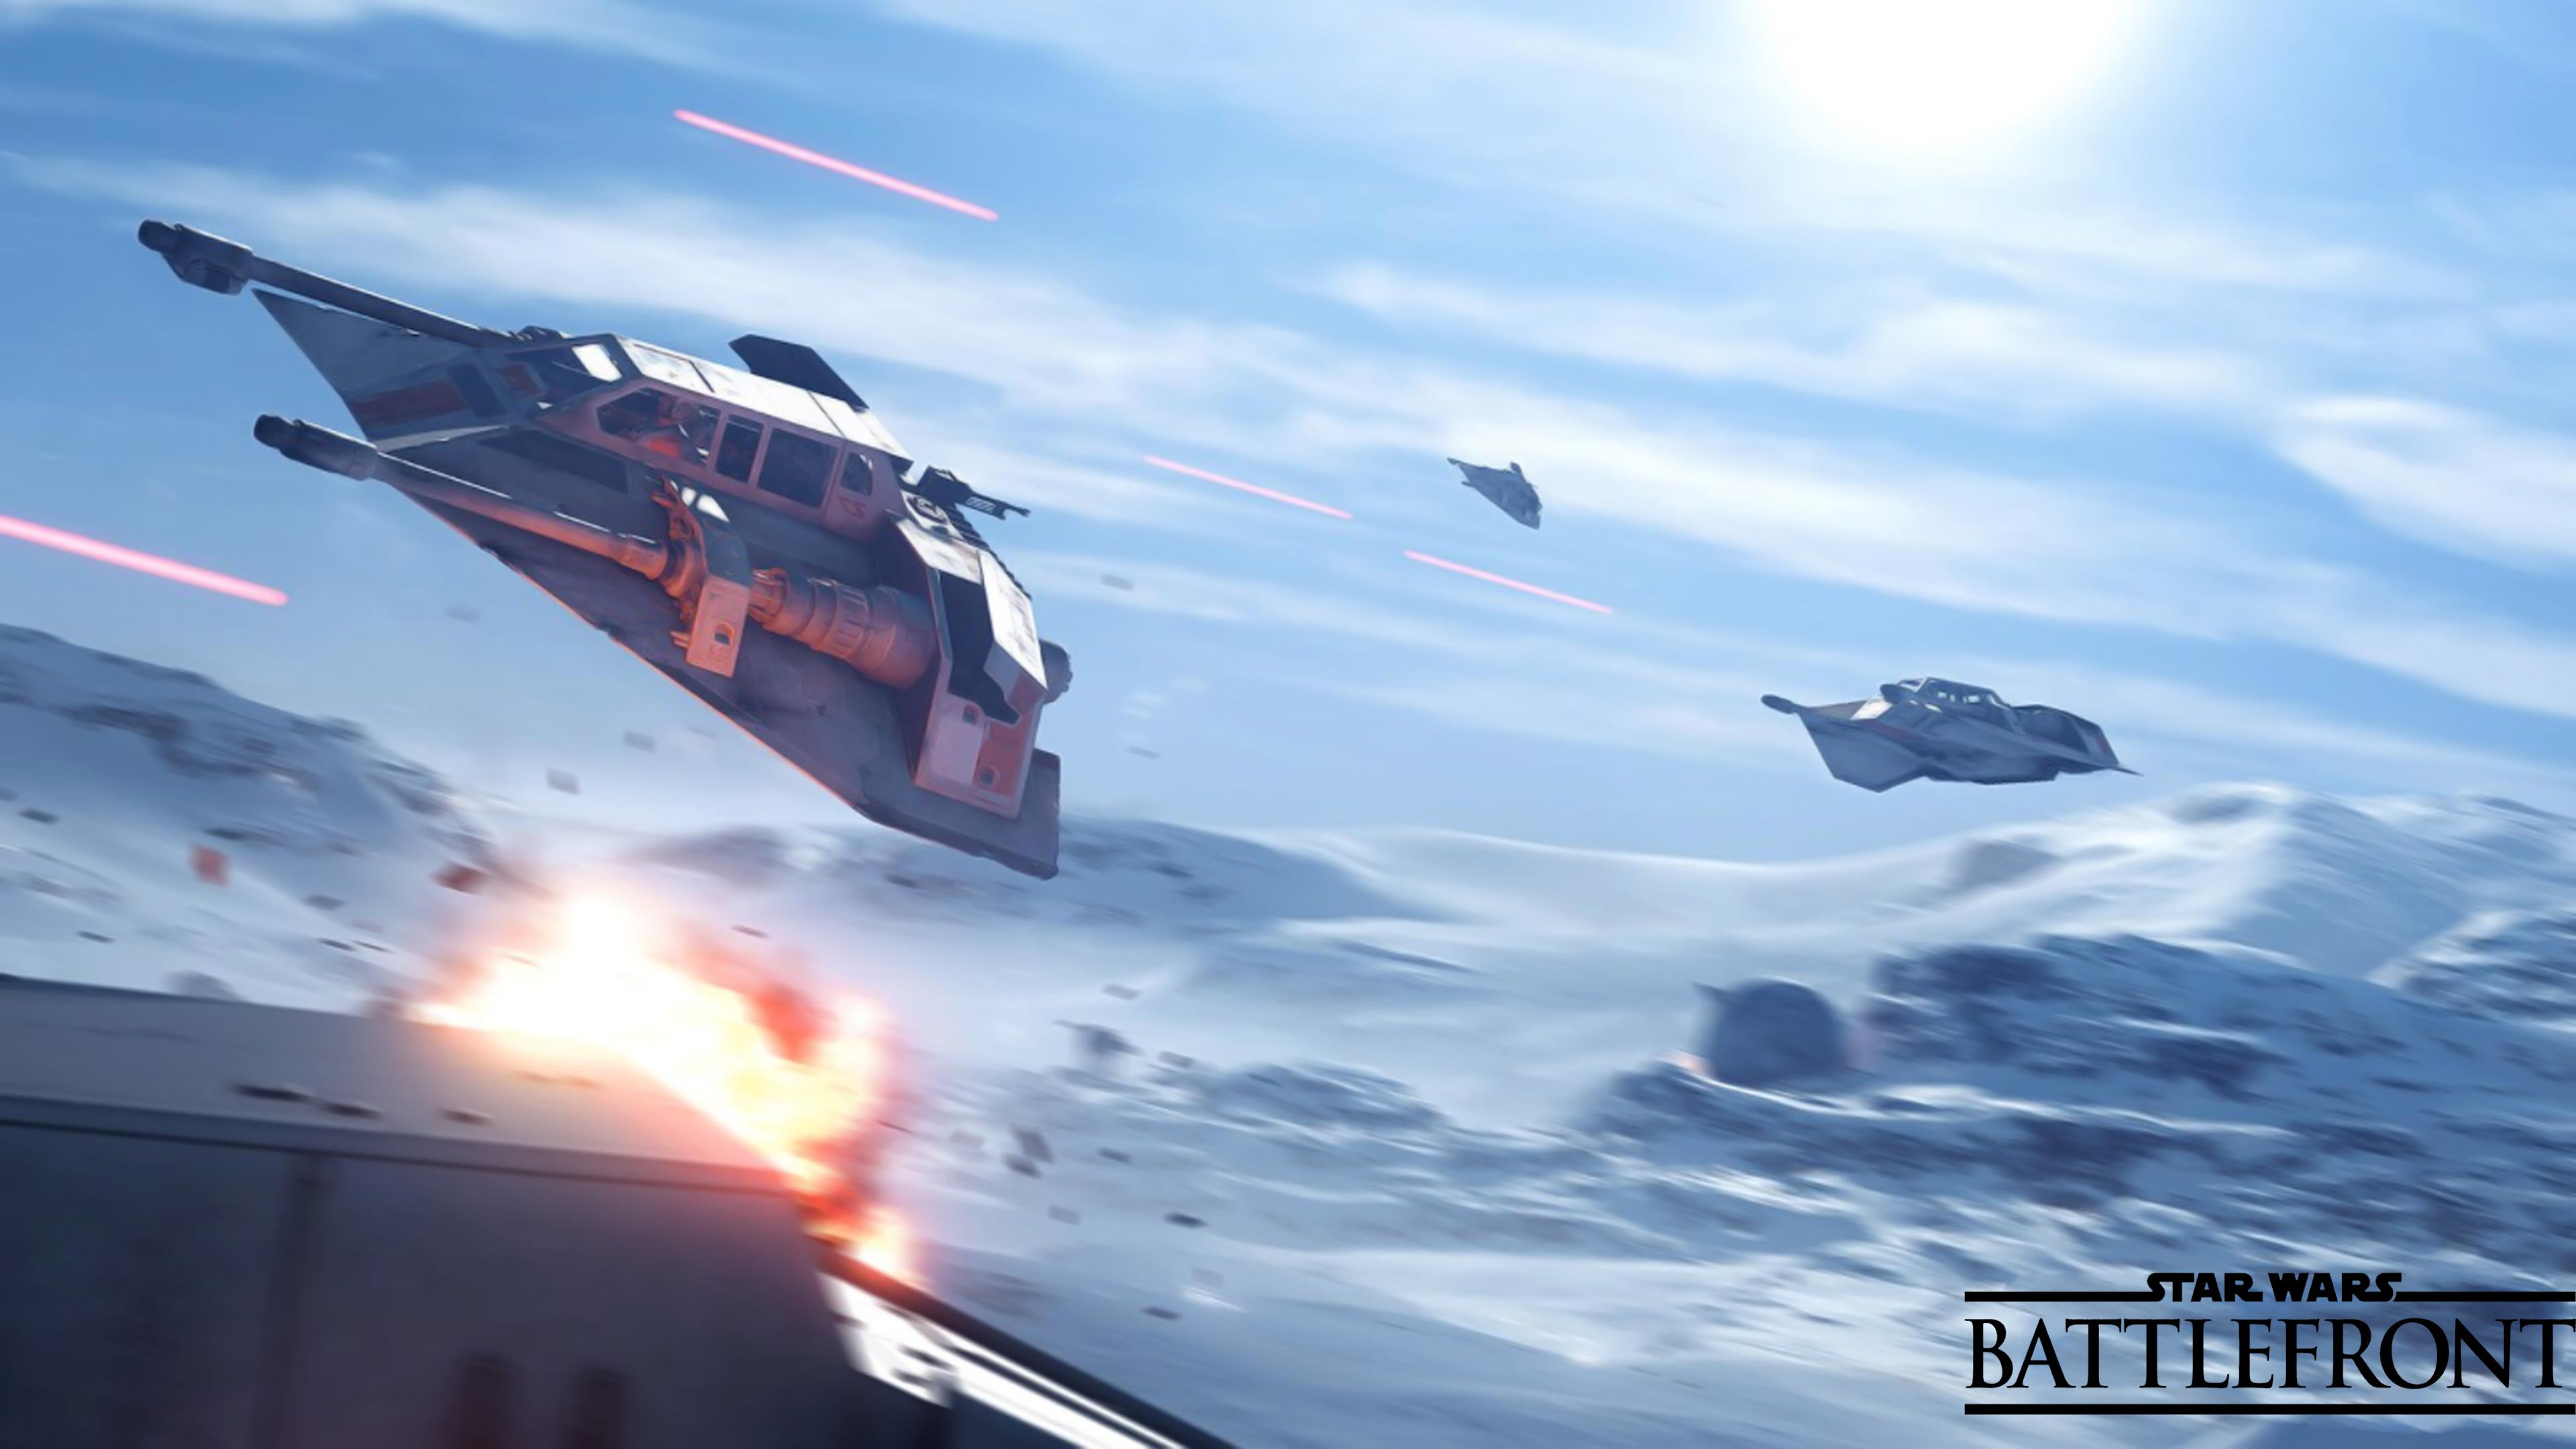 I made another 4K Star Wars Battlefront wallpaper for you guys